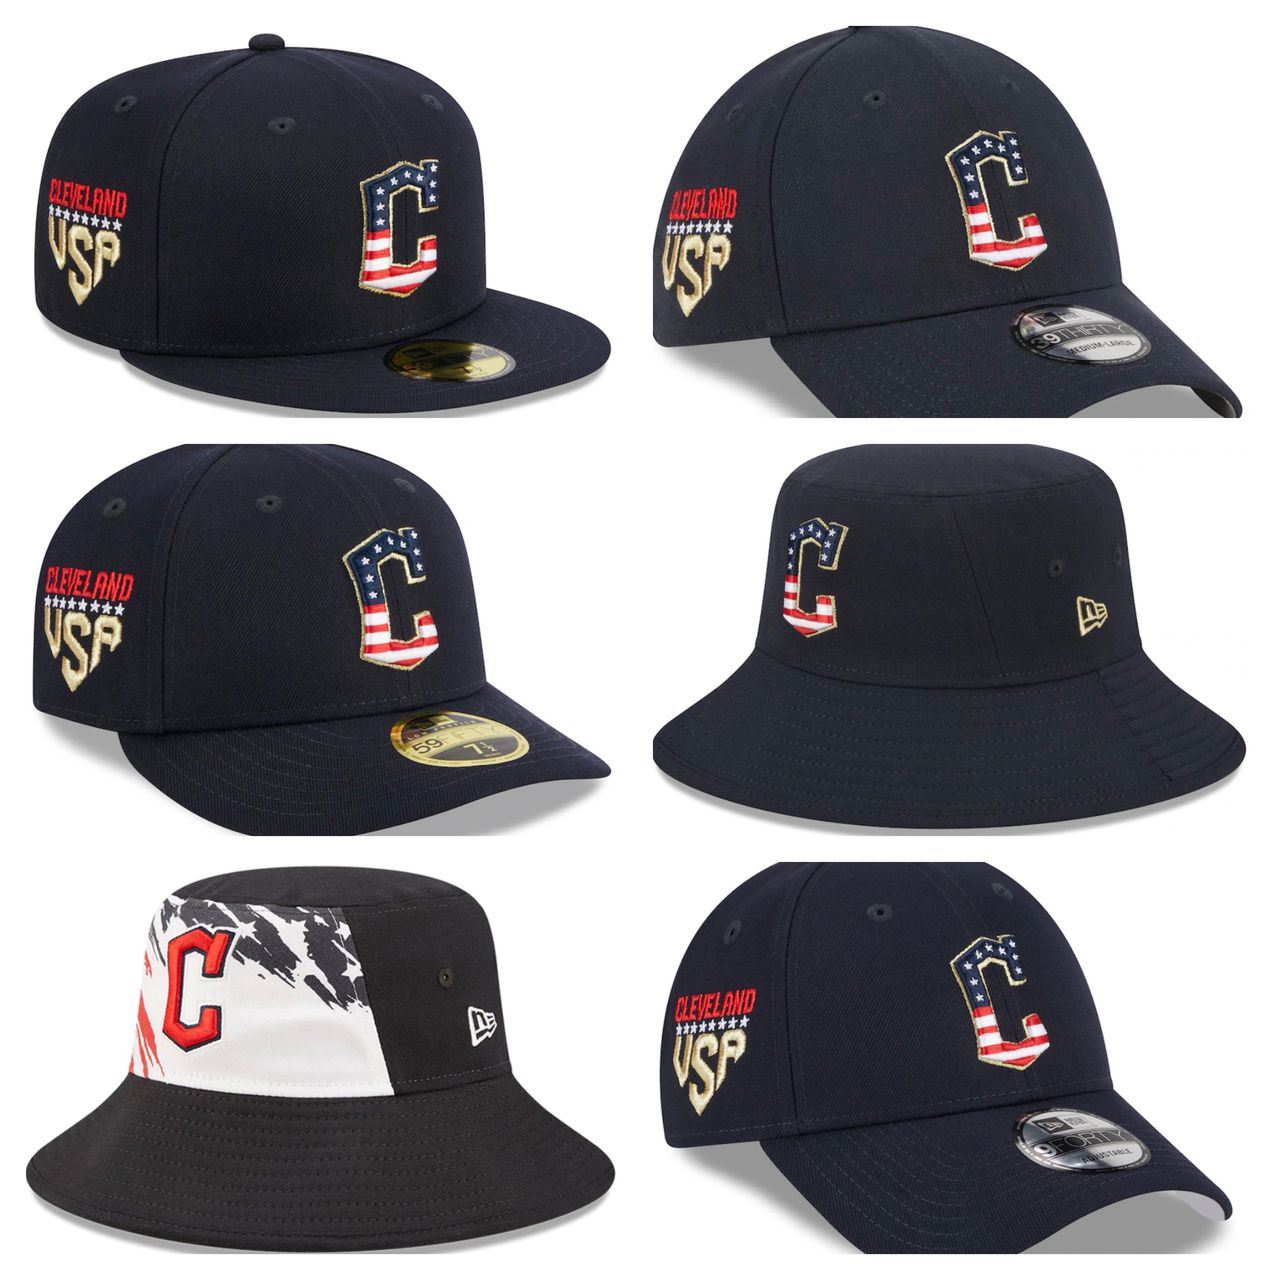 Fanatics Stars And Stripes Collection